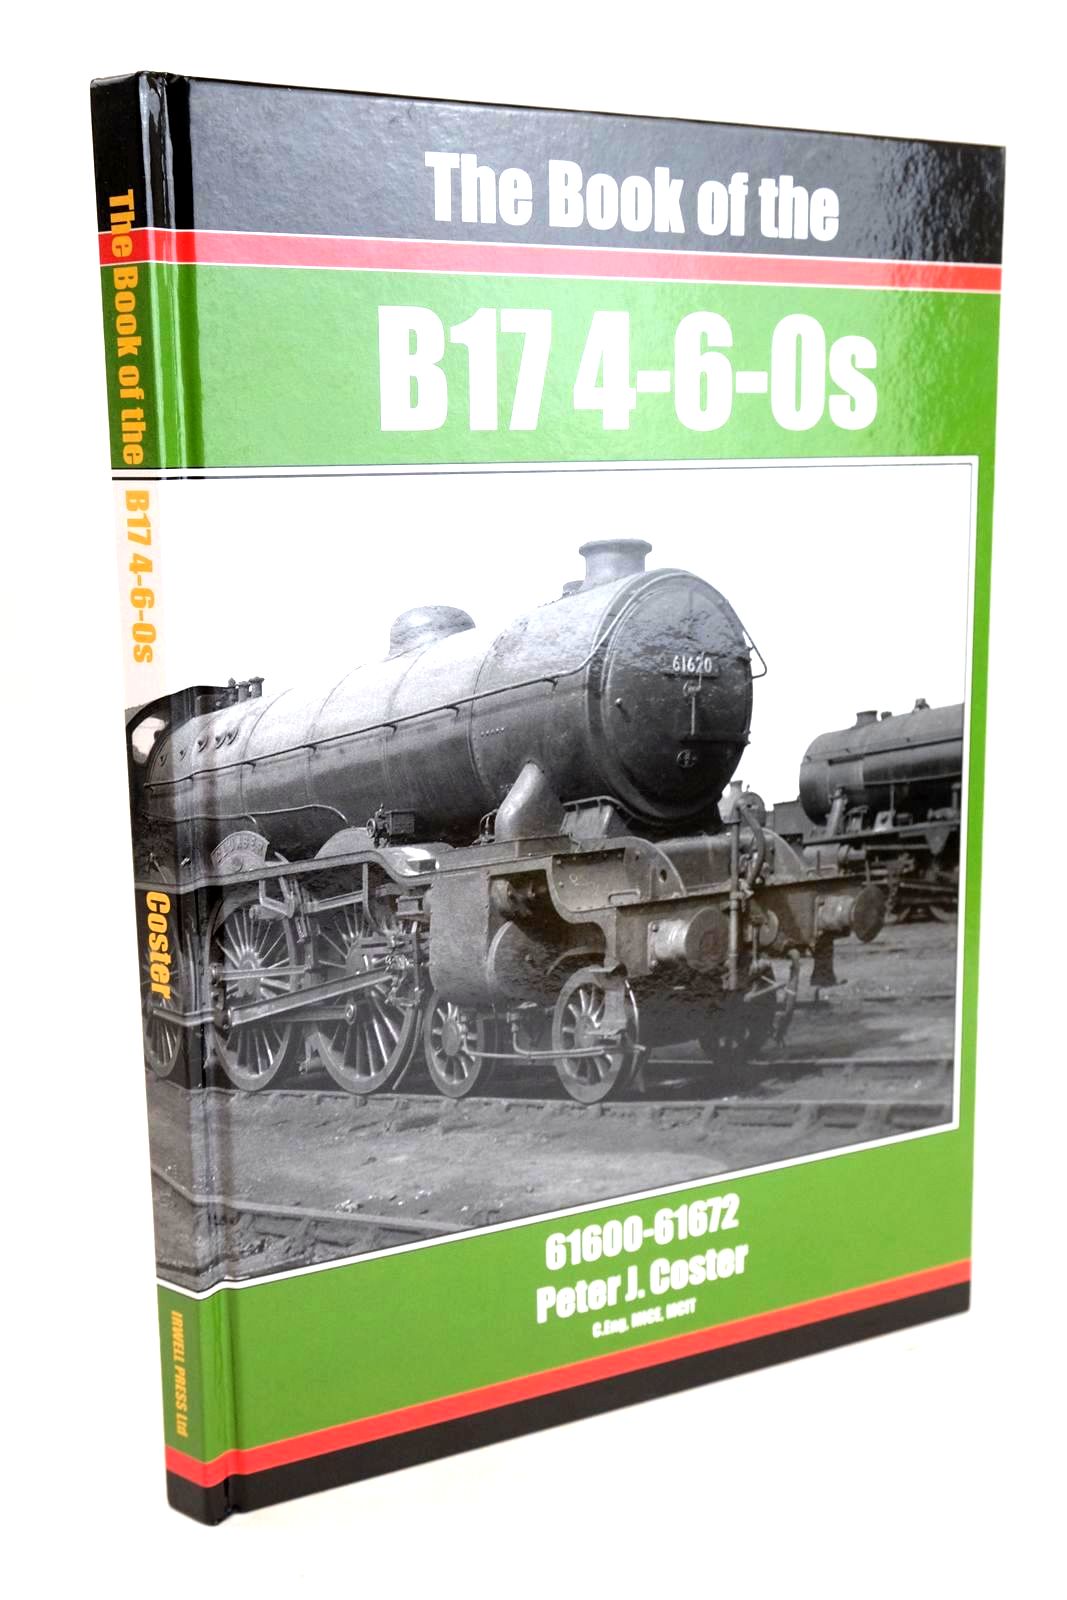 Photo of THE BOOK OF THE B17 4-6-0S written by Coster, Peter J. published by Irwell Press (STOCK CODE: 1327313)  for sale by Stella & Rose's Books